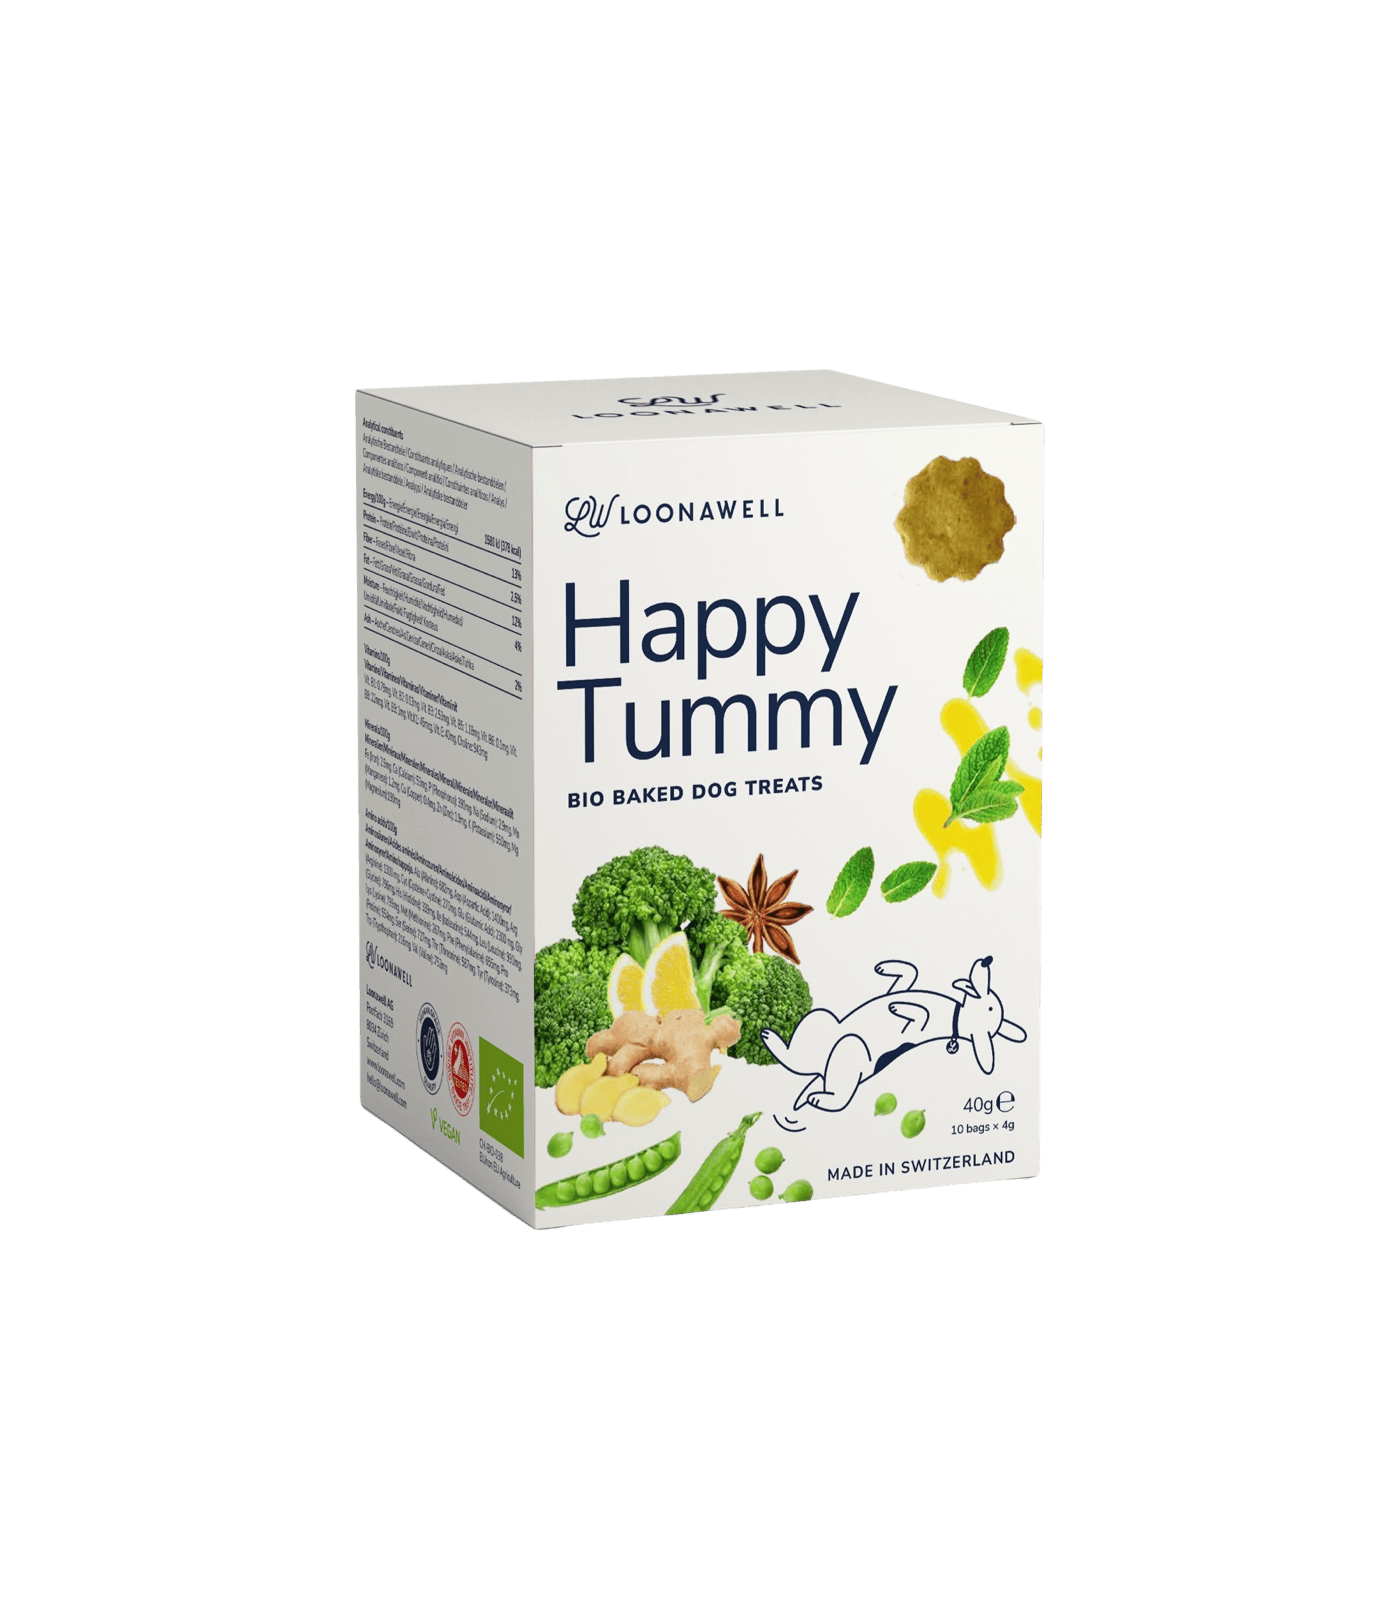 LOONAWELL Happy Tummy dog treats. For dogs with sensitive stomachs. Handmade in Switzerland and traditionally baked. Organic treats by LOONAWELL.